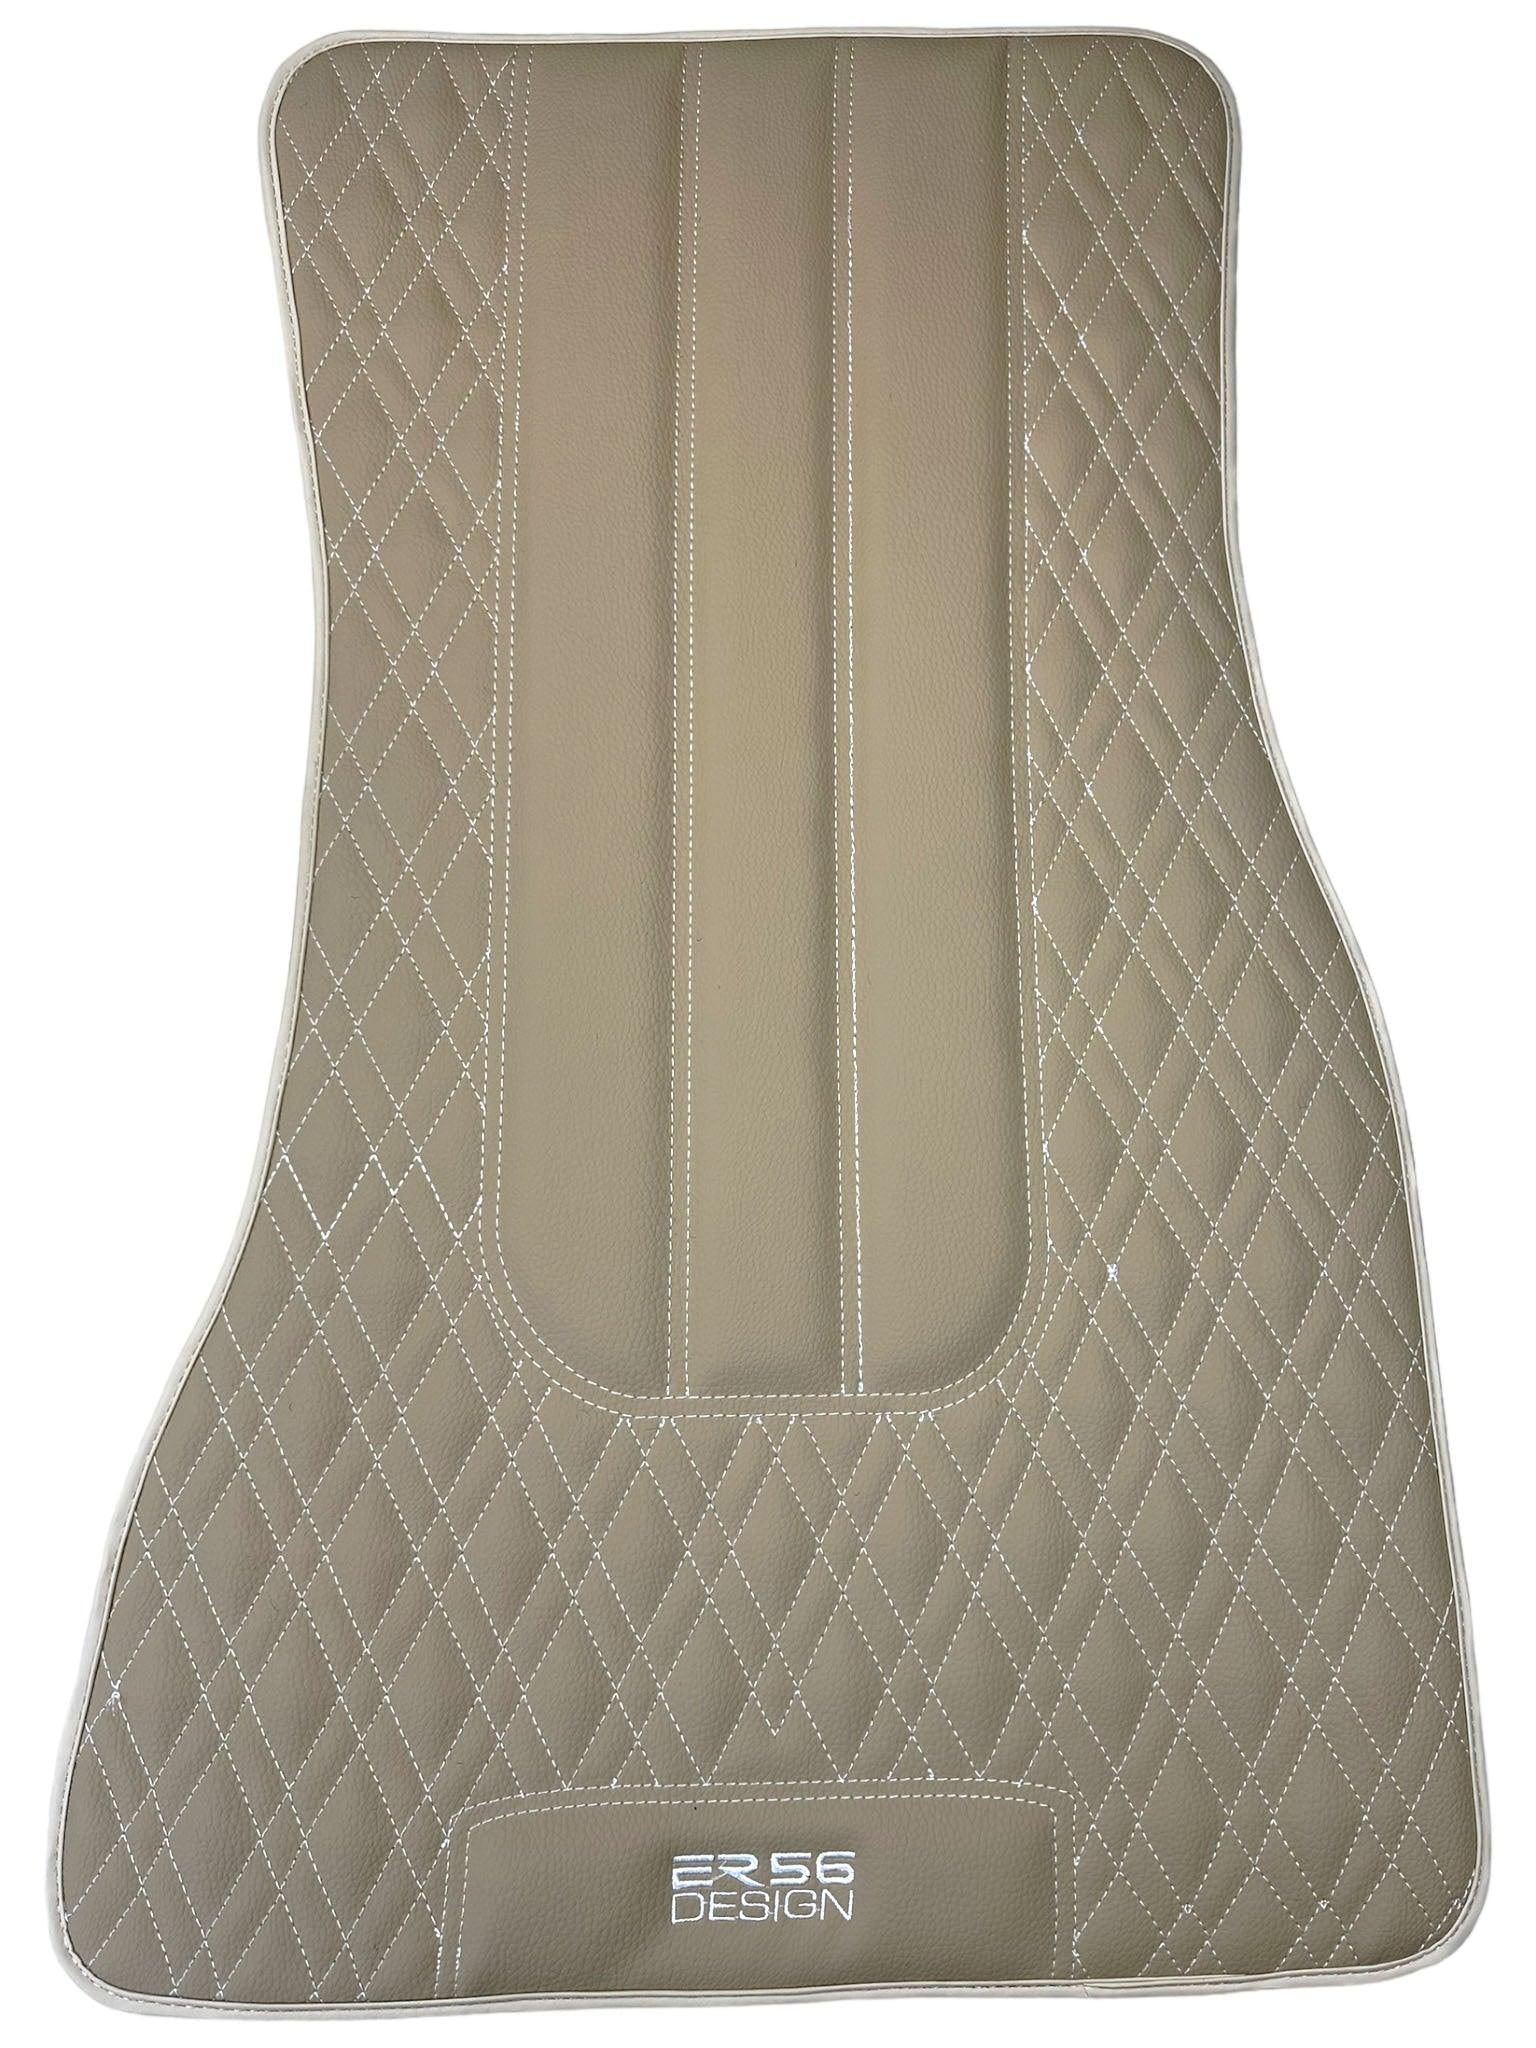 Beige Leather Floor Mats For BMW X6 Series F16